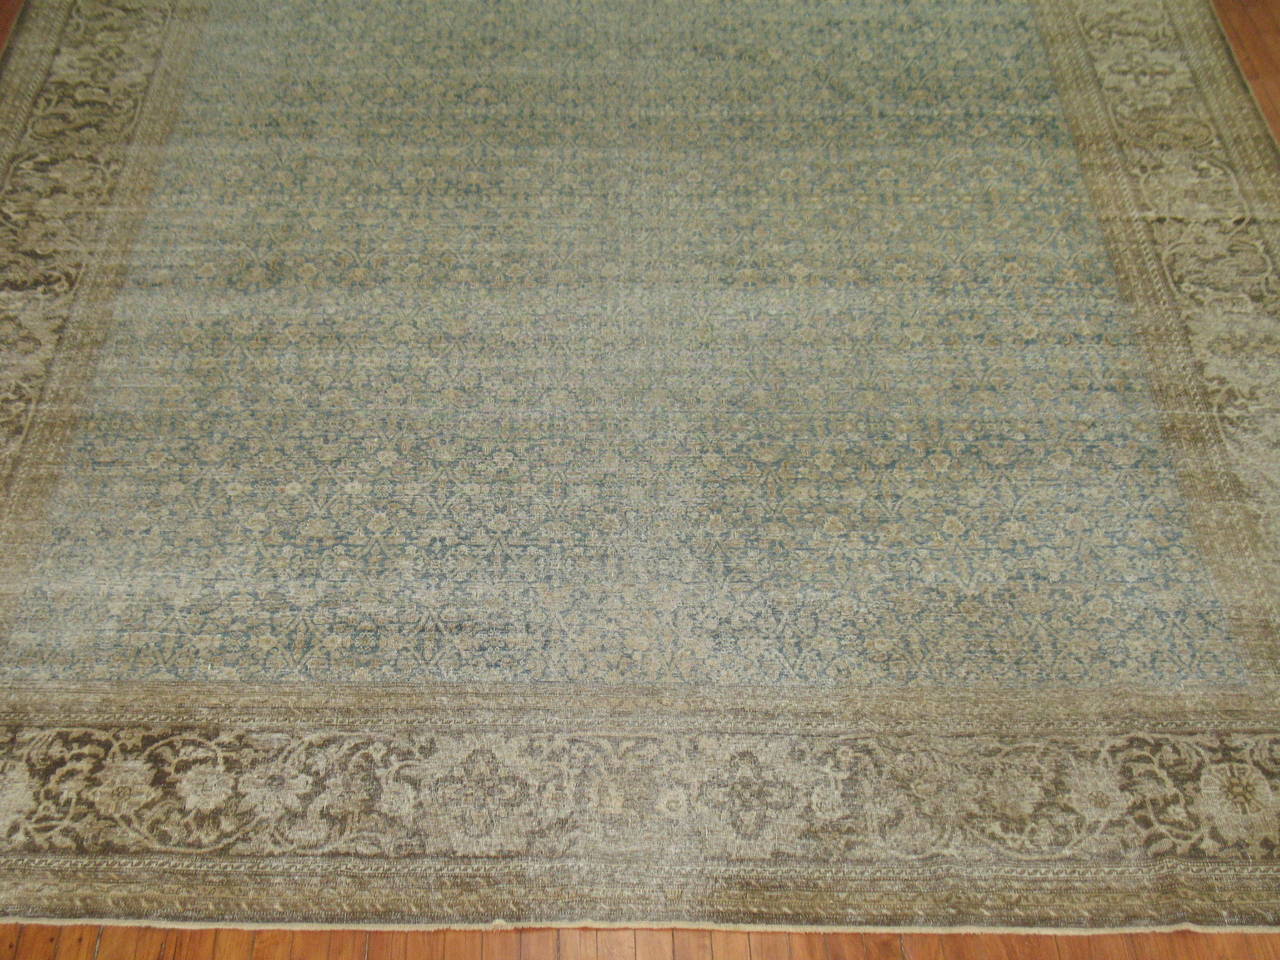 Late 19th century light blue Persian Tabriz rug with an all-over Herati motif.